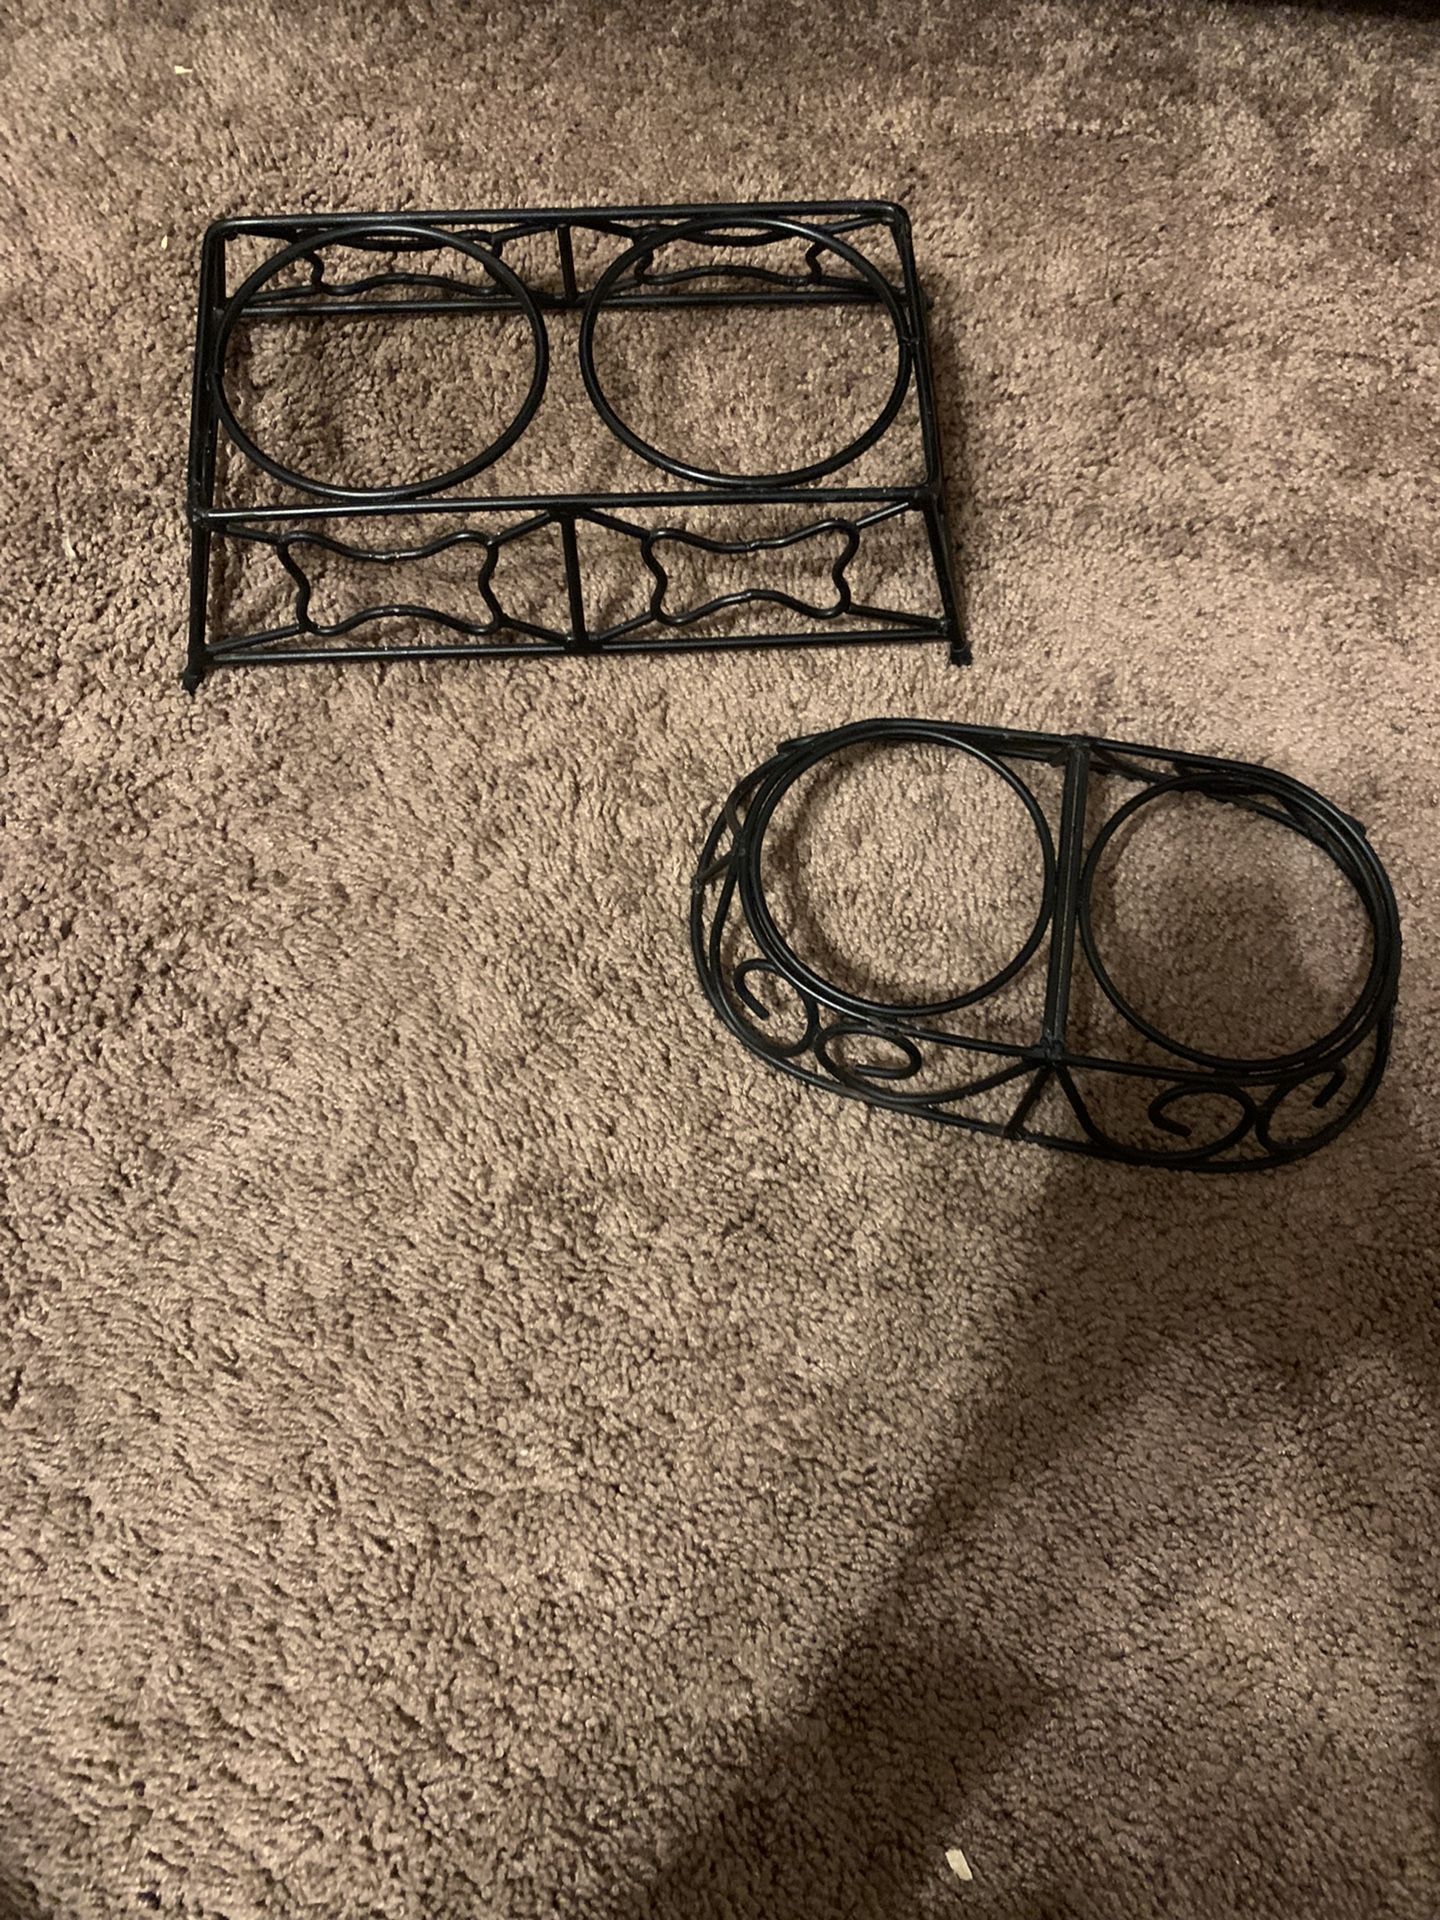 Free Dog/cat Bowl Stands